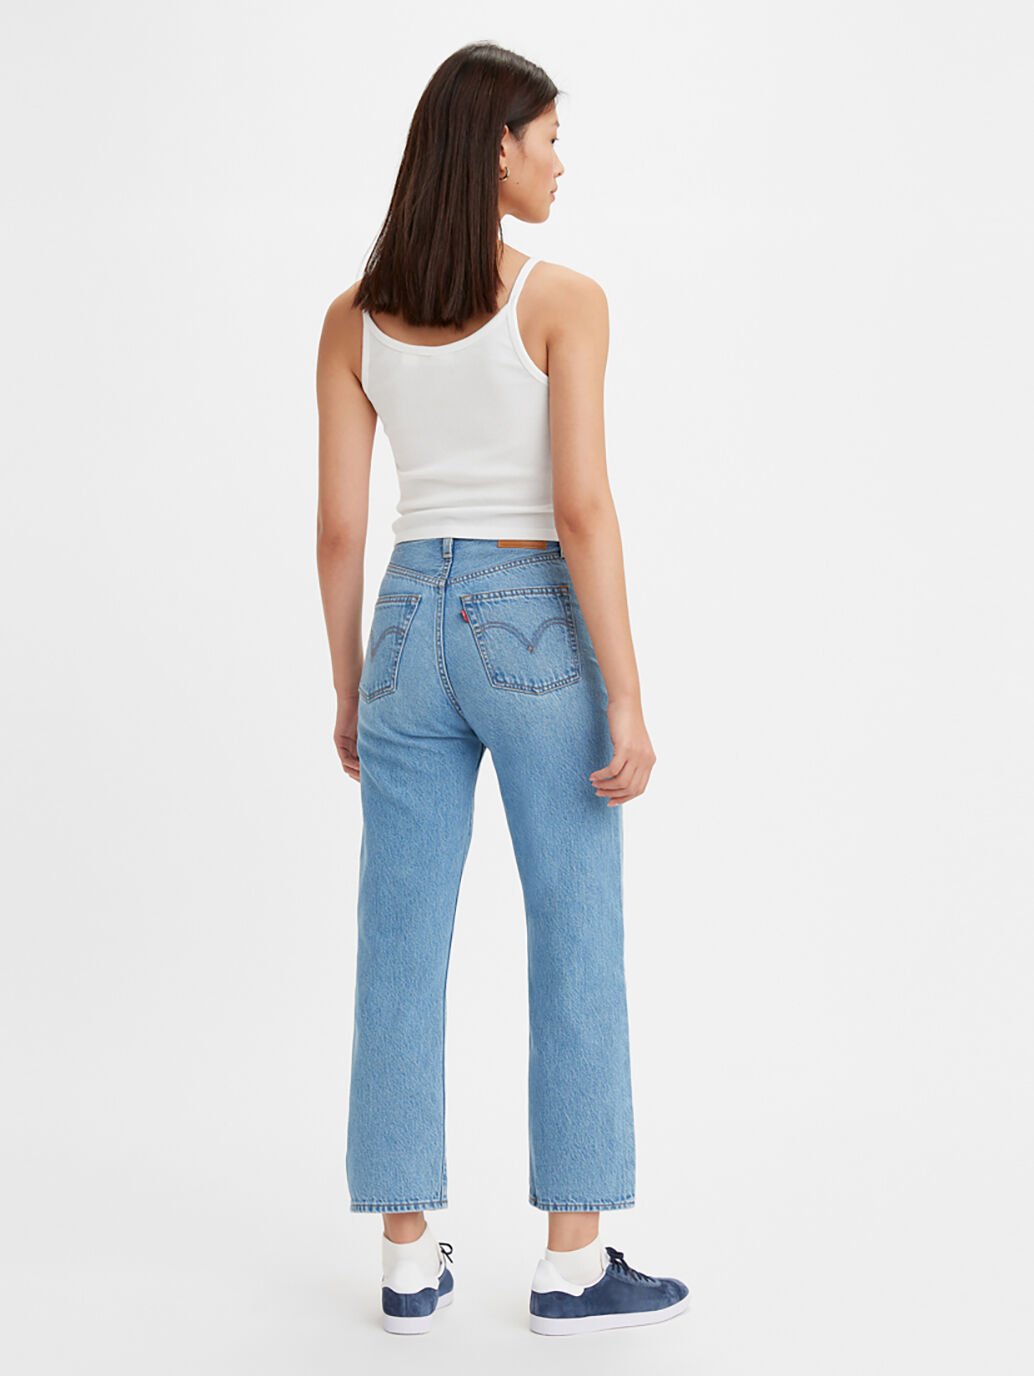 Ribcage Straight Ankle Jeans in Light Indigo Worn In